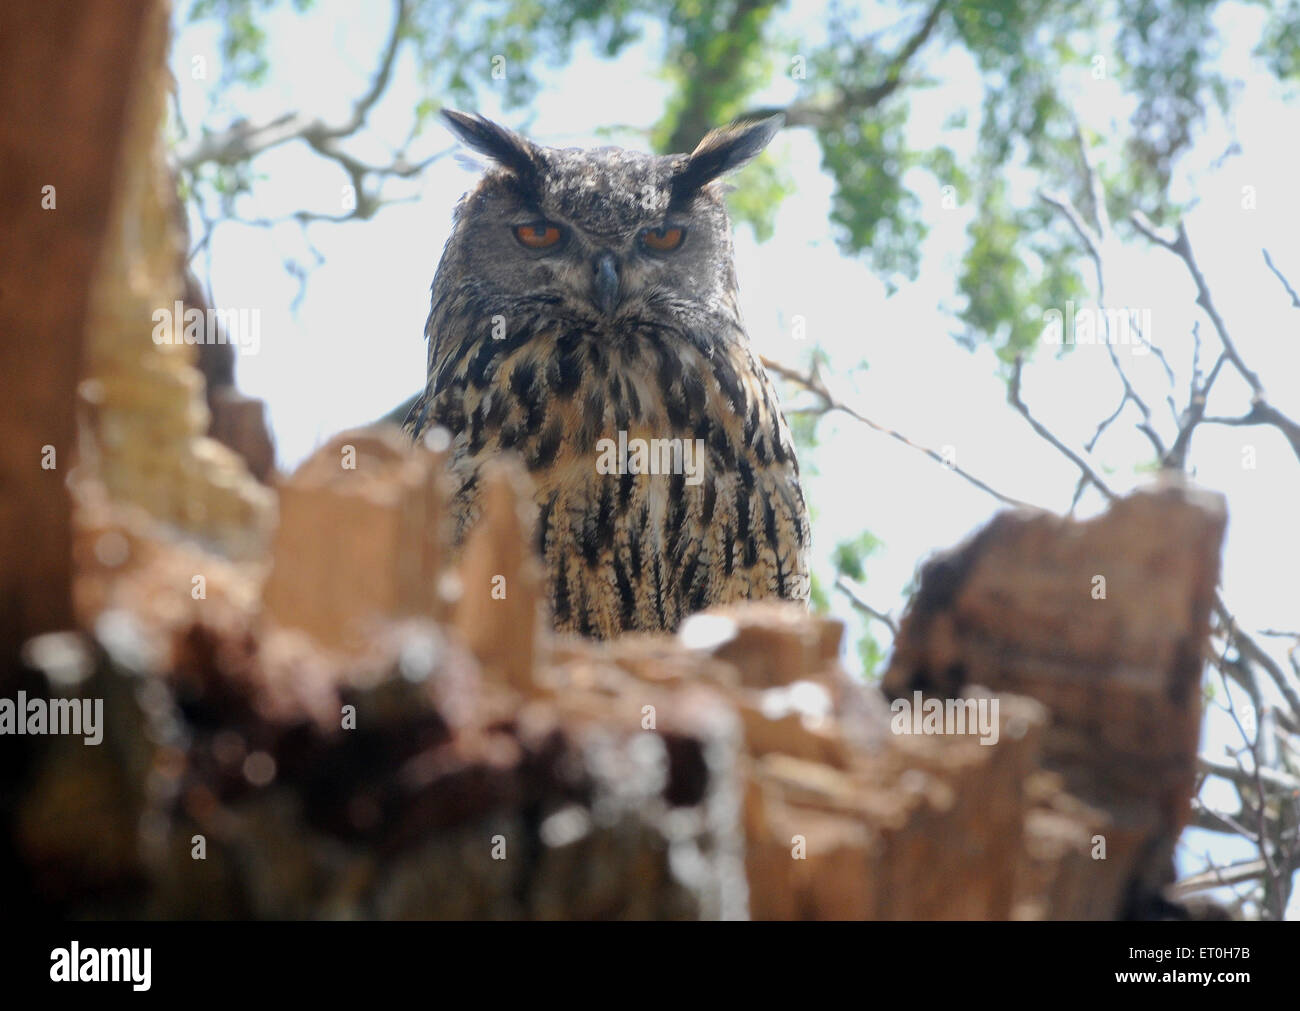 May 2015  An Eagle Owl  Bubo bubo, rests on an old tree. Pic Mike Walker, Mike Walker Pictures Stock Photo